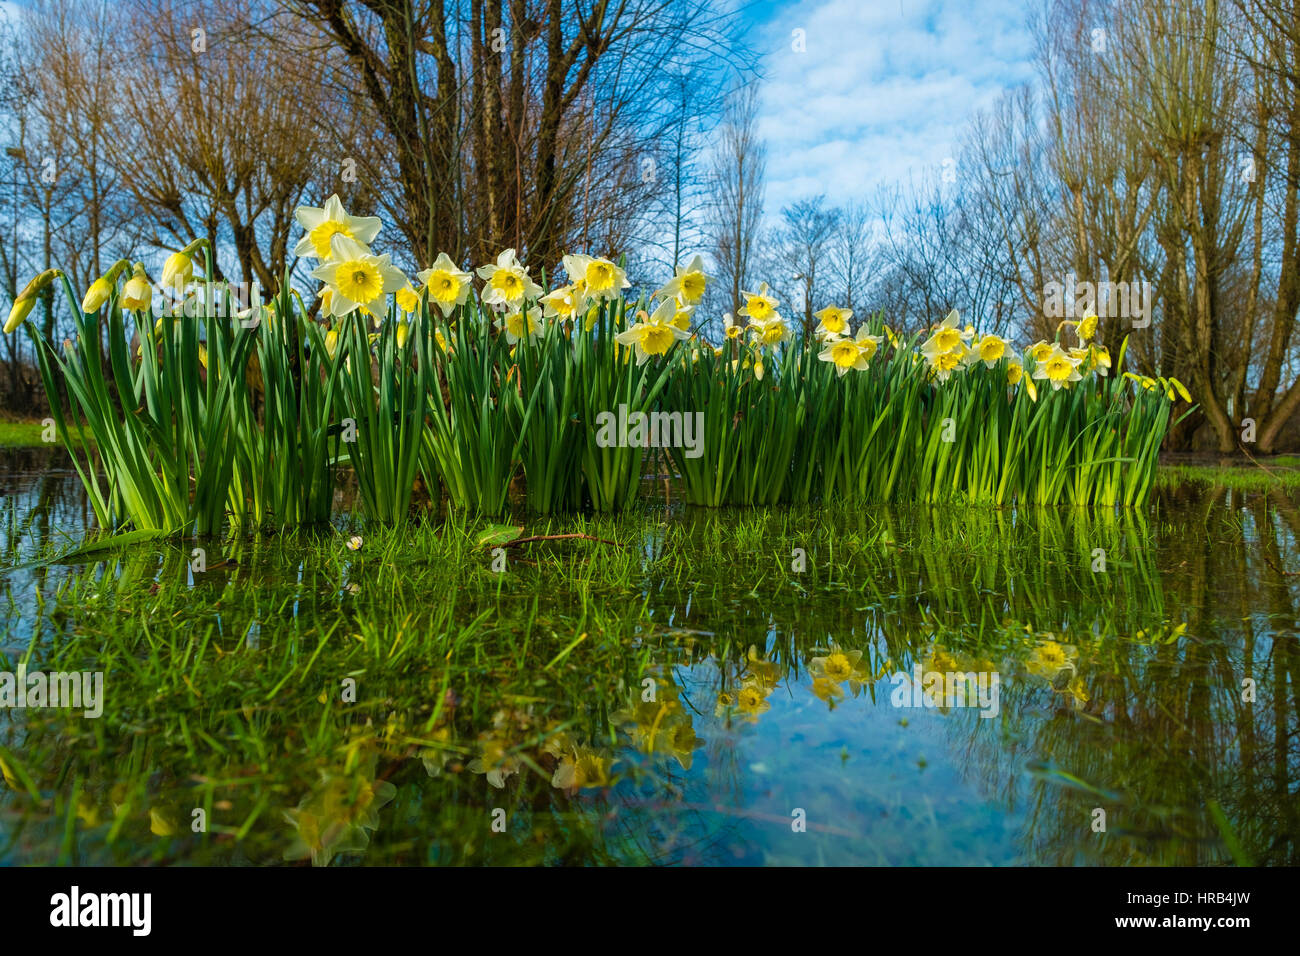 Aberystwyth, Wales, UK. 1st Mar, 2017. UK Weather: Bright yellow and white Daffodils, the national emblem of Wales bursting into bloom and reflected in a pool of water on a flooded field in Aberystwyth on March 1st, St David's Day (The national Saints day for Wales) More wintery, cold weather, with strong winds and the risk of snow in places, is forecast for the day photo Credit: Keith Morris/Alamy Live News Stock Photo